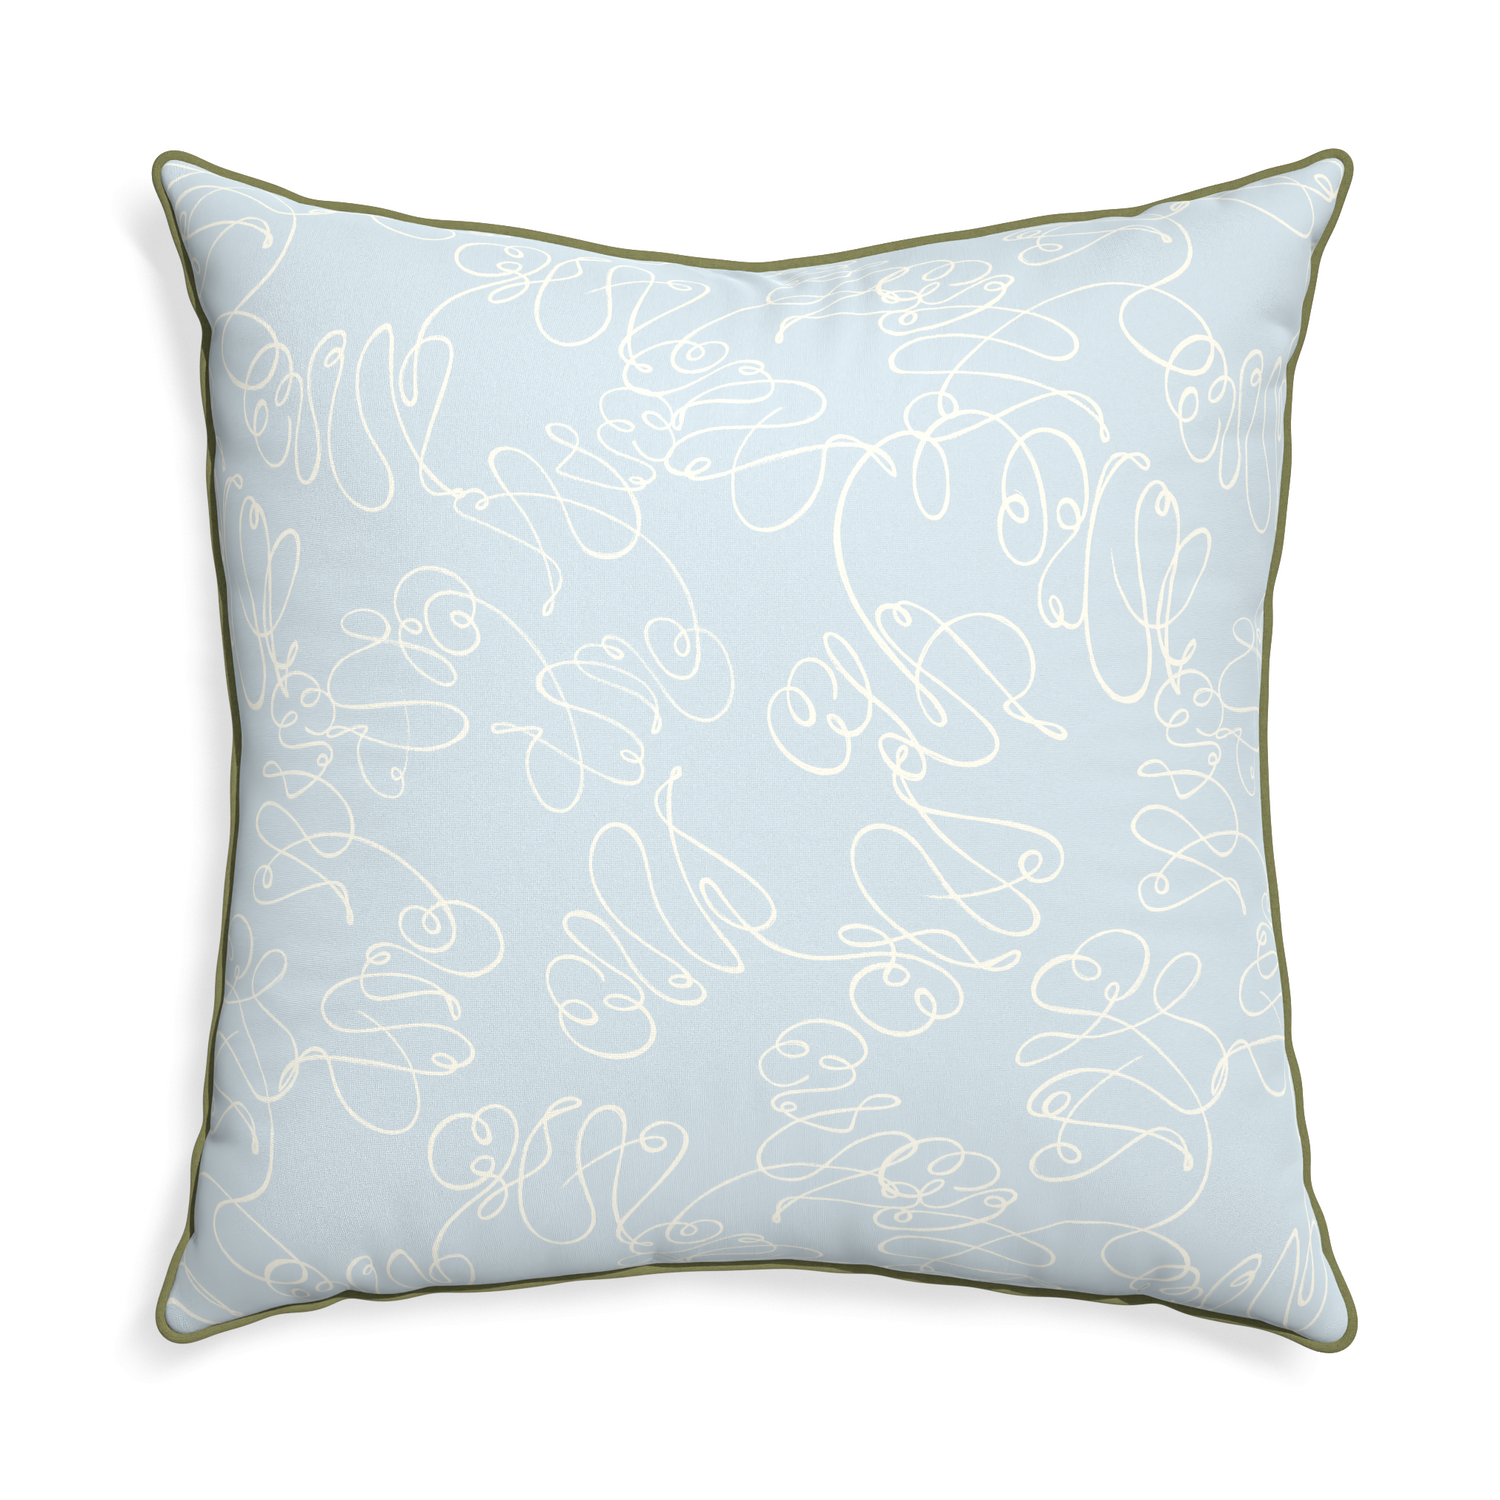 Euro-sham mirabella custom pillow with moss piping on white background